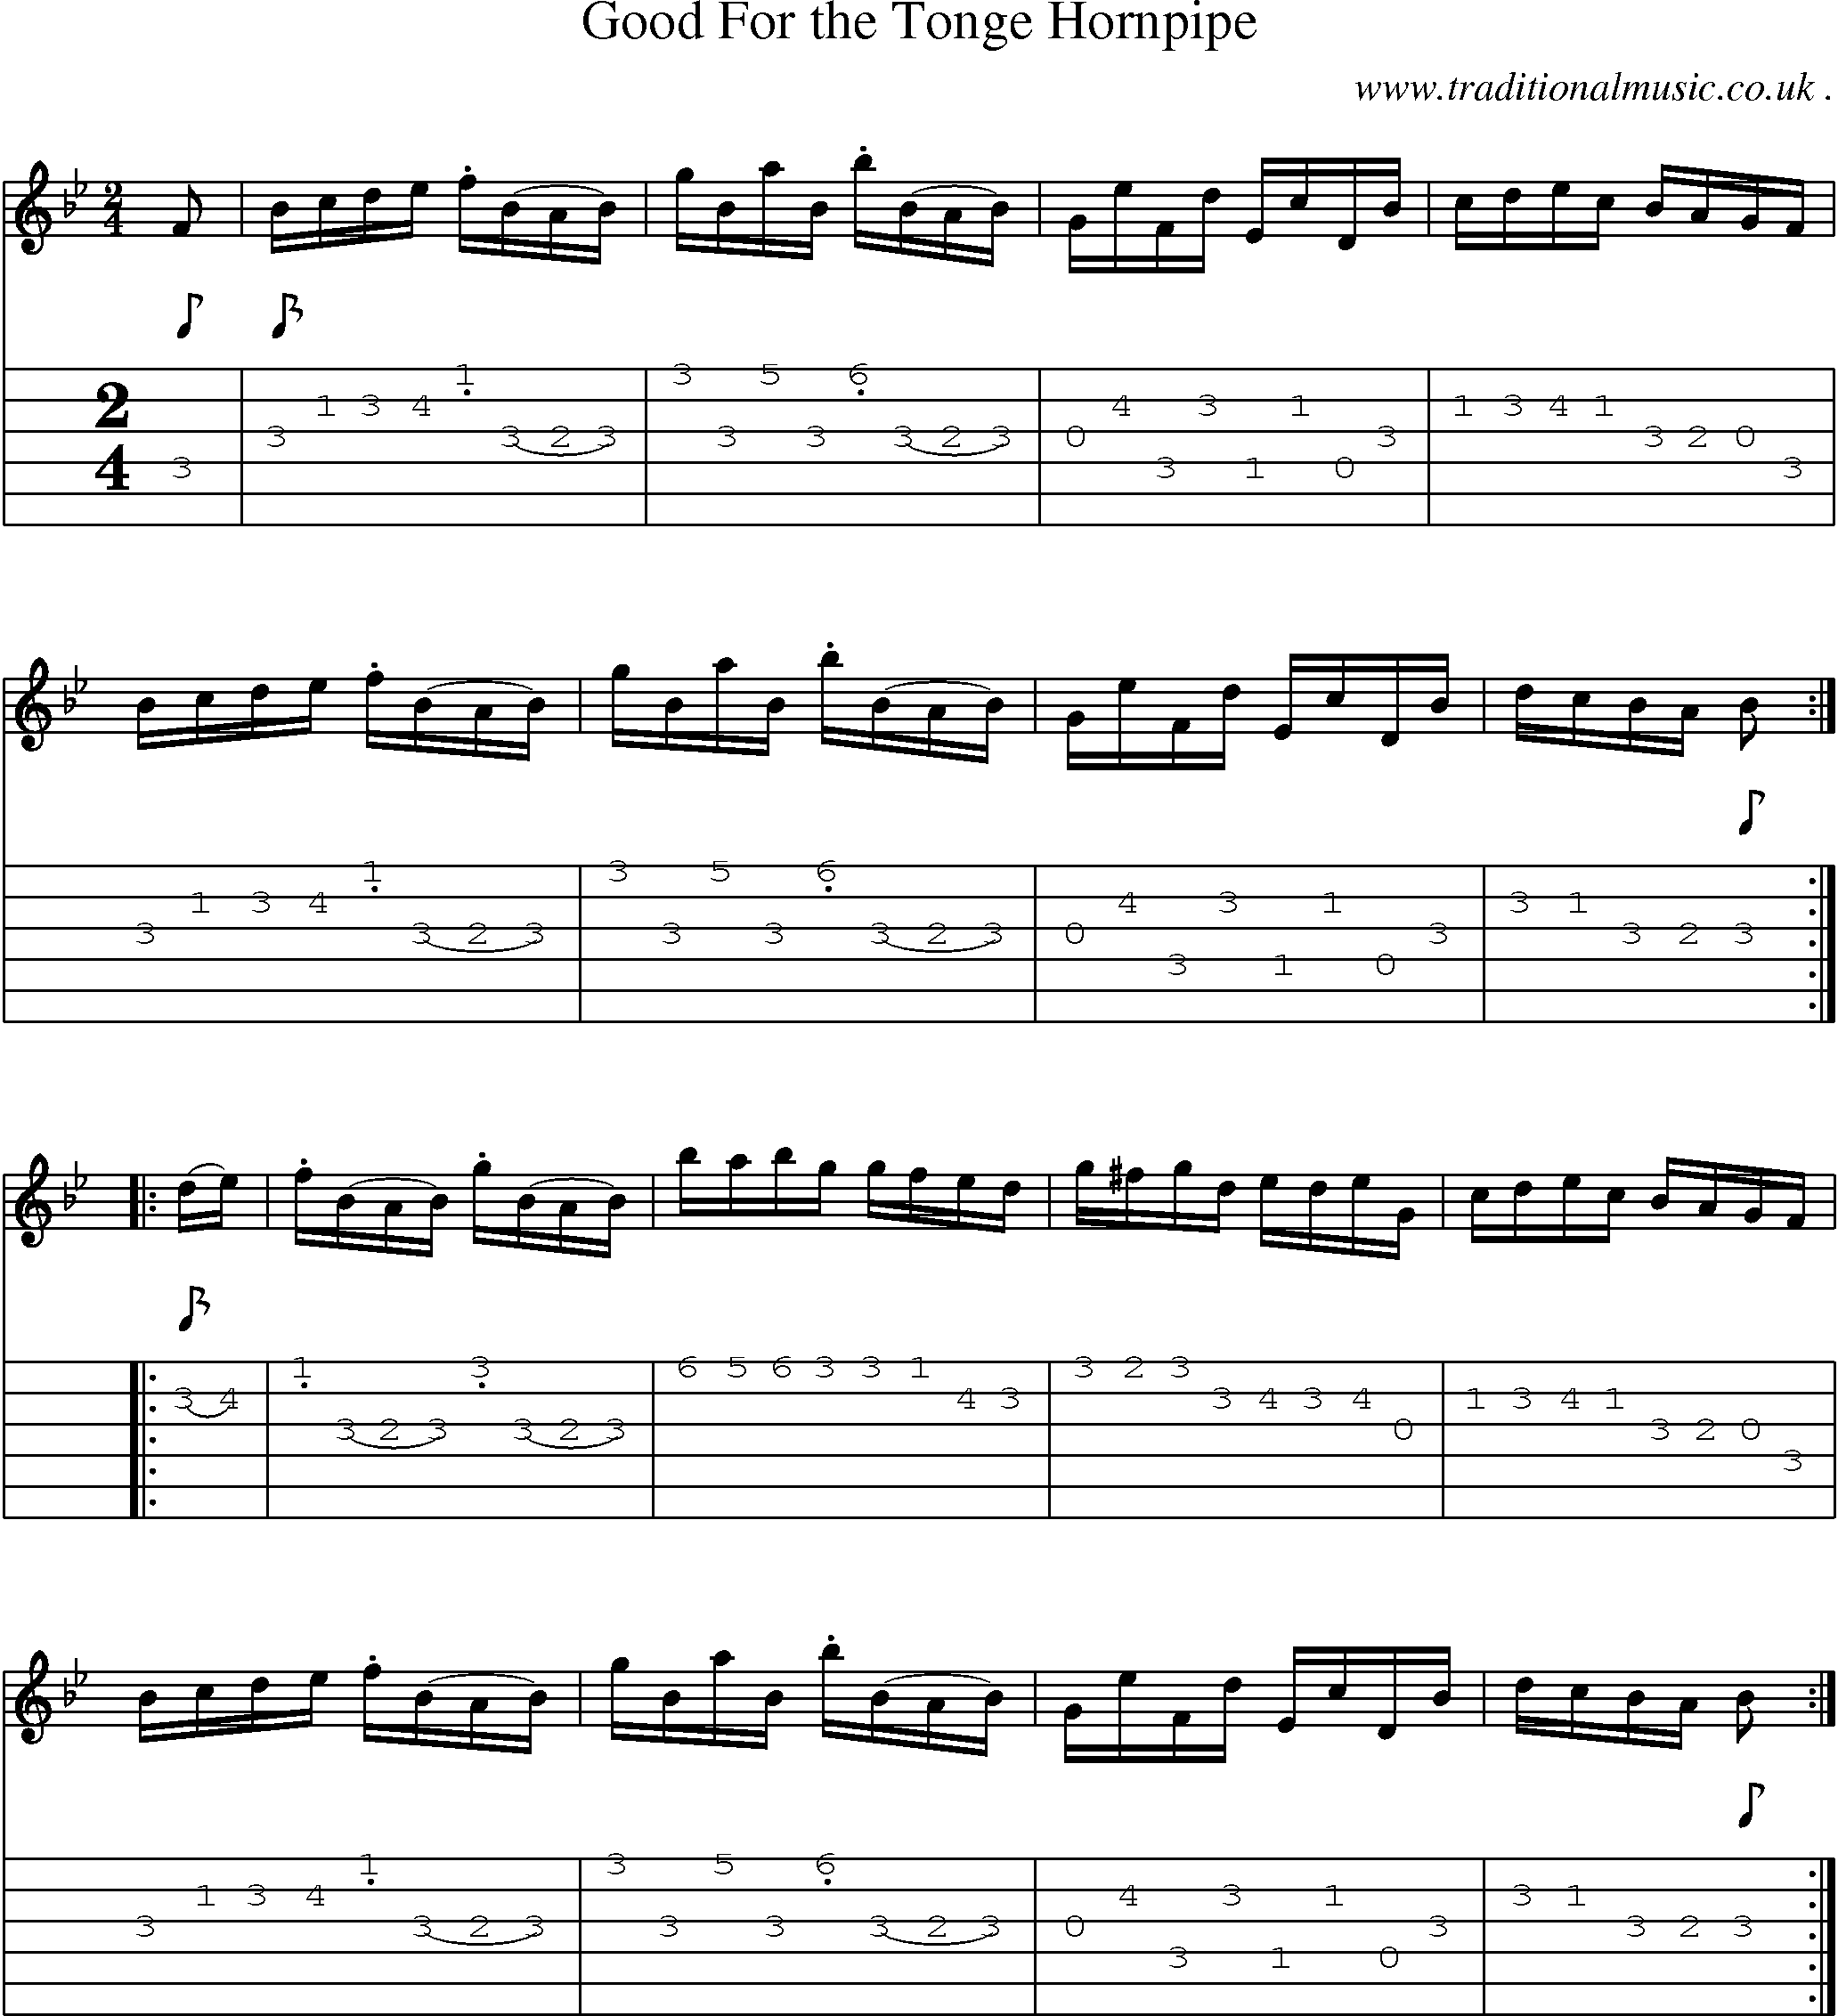 Sheet-Music and Guitar Tabs for Good For The Tonge Hornpipe